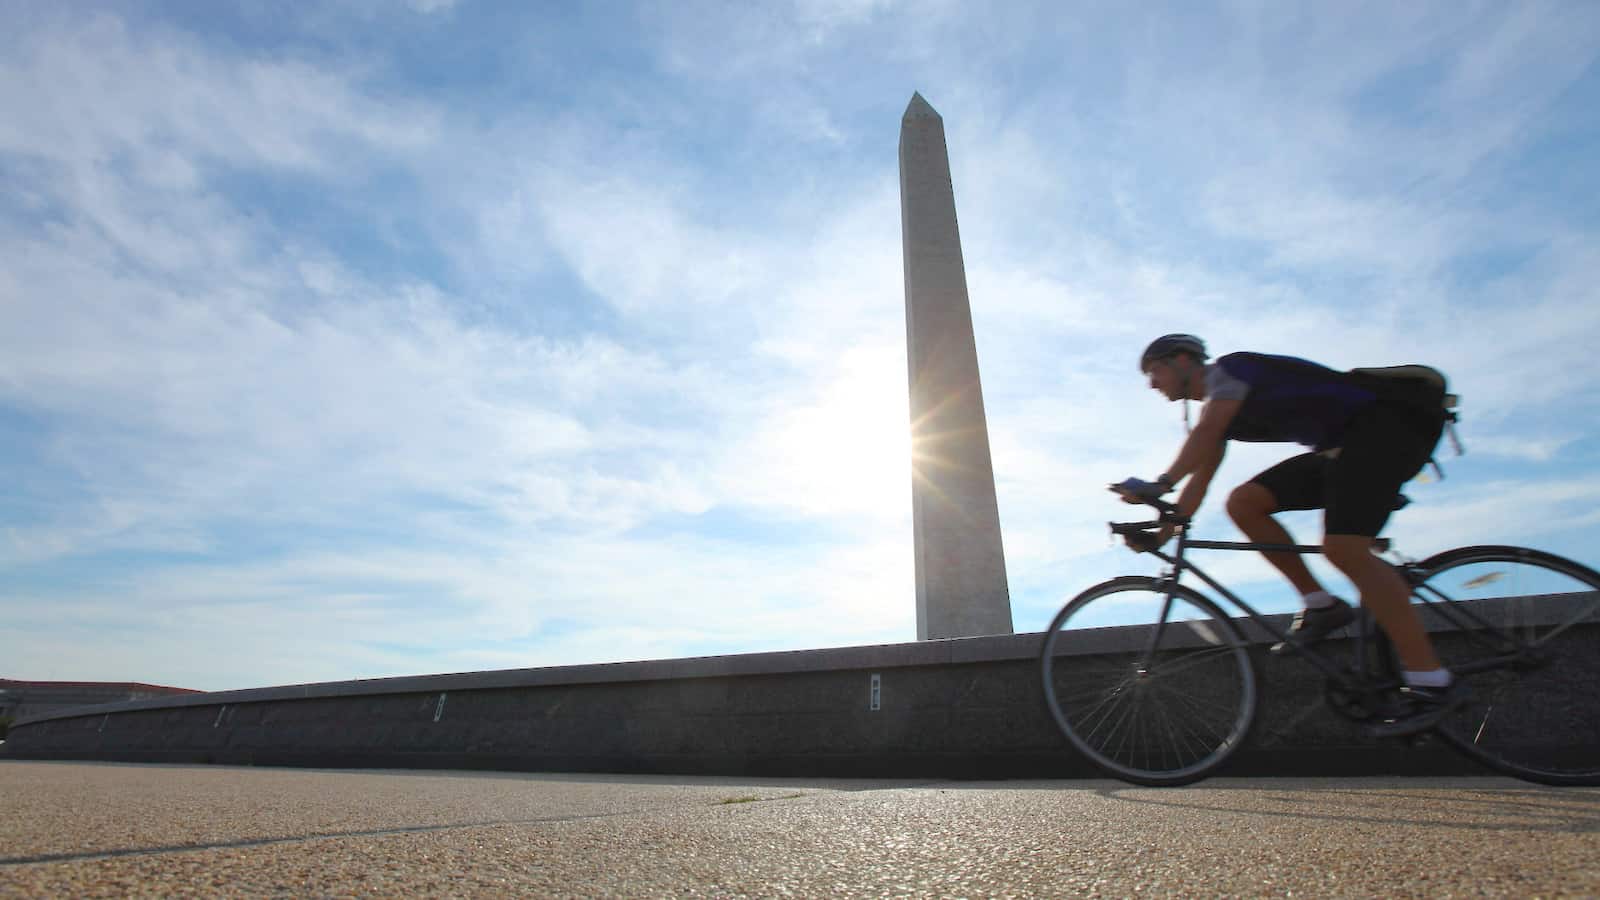 WTOP https://wtop.com/news/2014/07/everything-you-need-to-know-about-biking-in-dc/